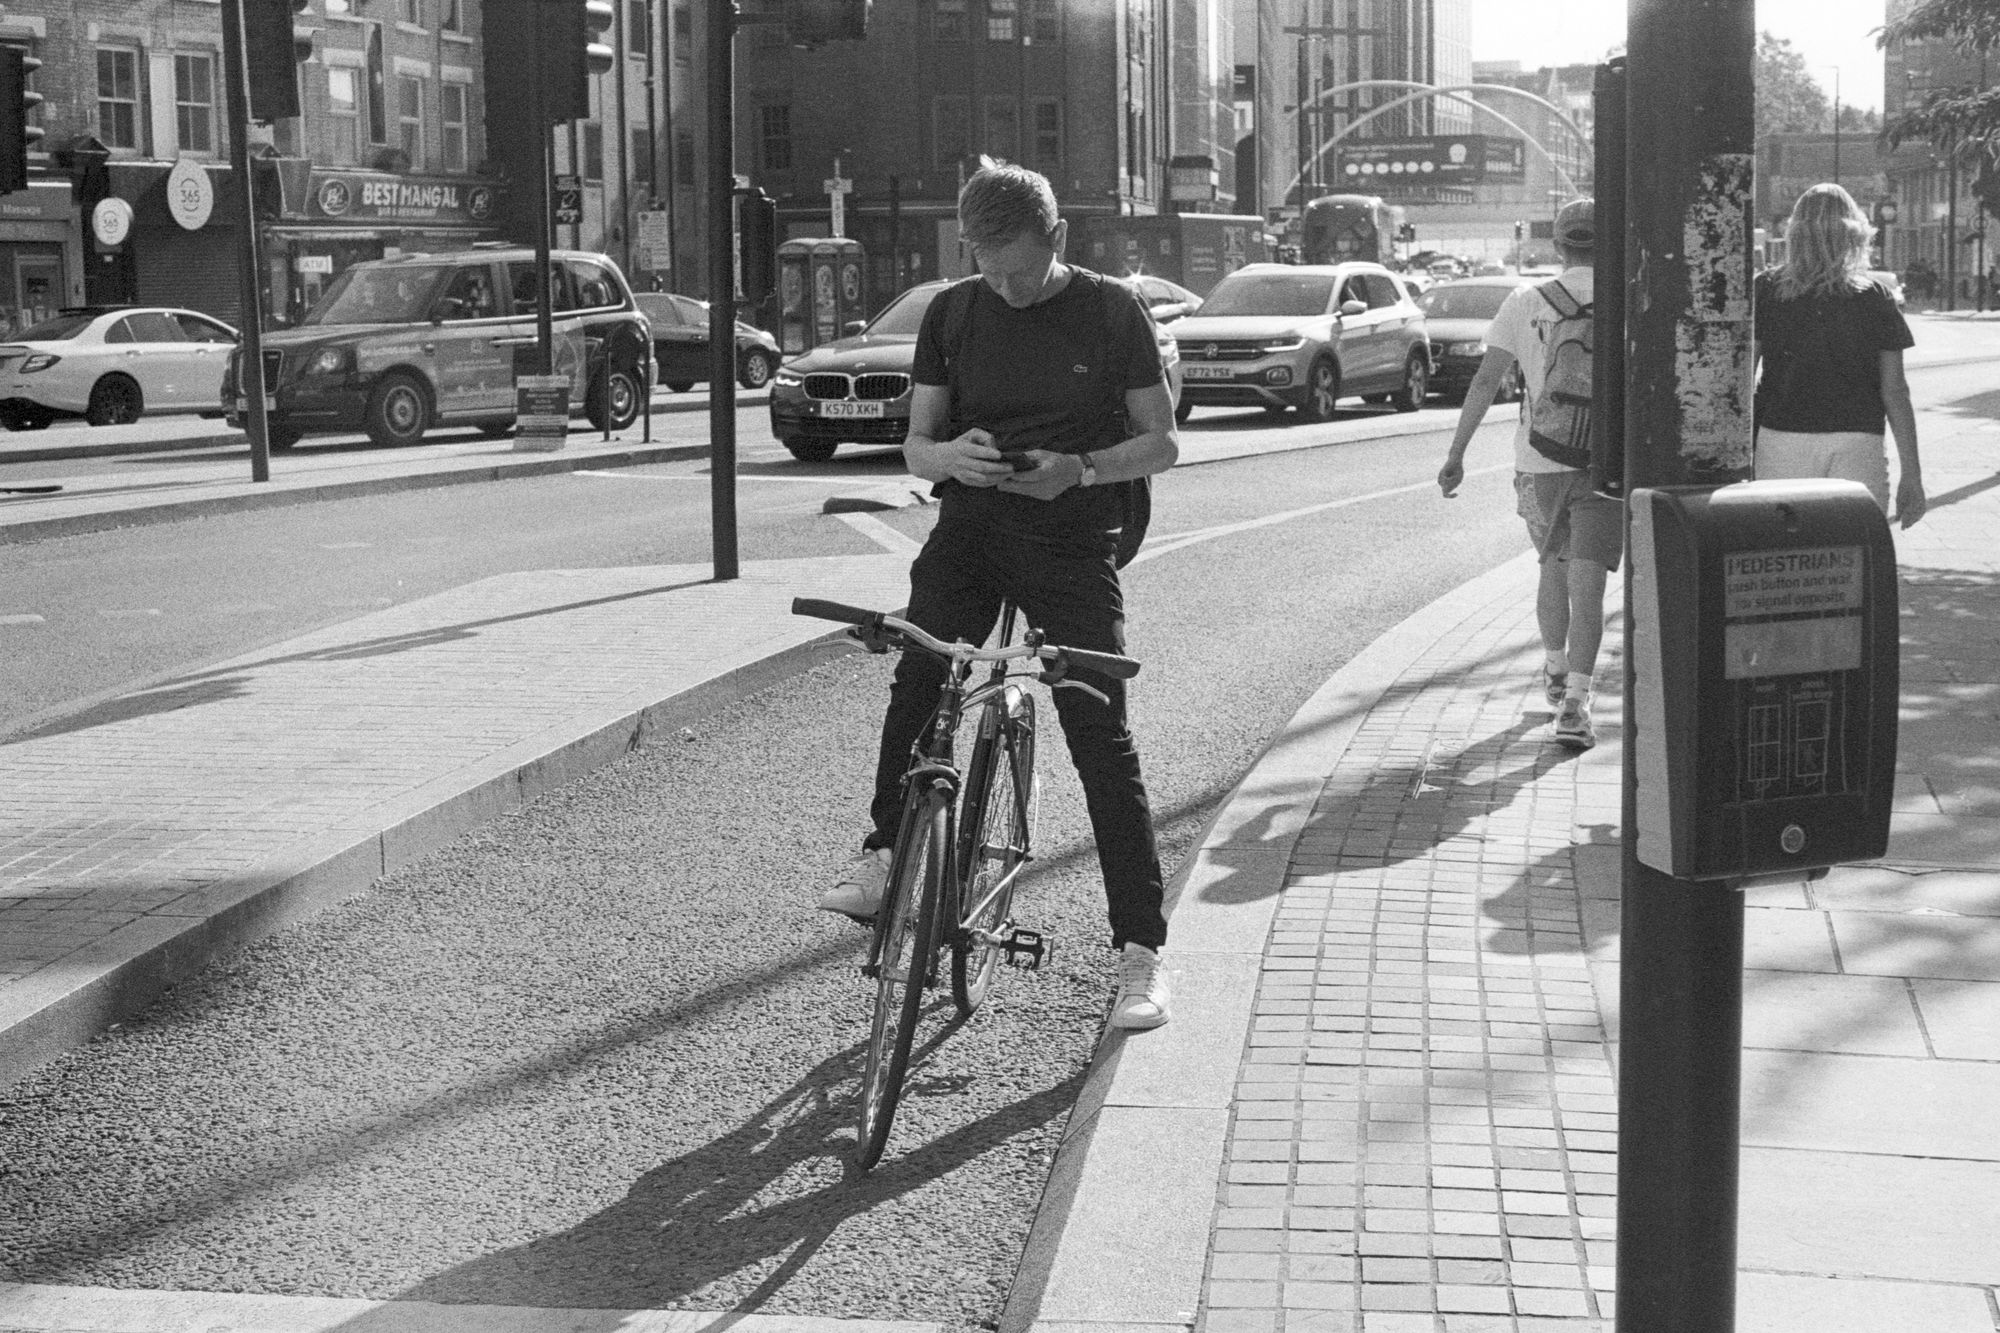 From a pedestrian crossing, a man in a black t-shirt on a bicycle sits waiting at the traffic lights, checking his phone, casting harsh diagonal shadows